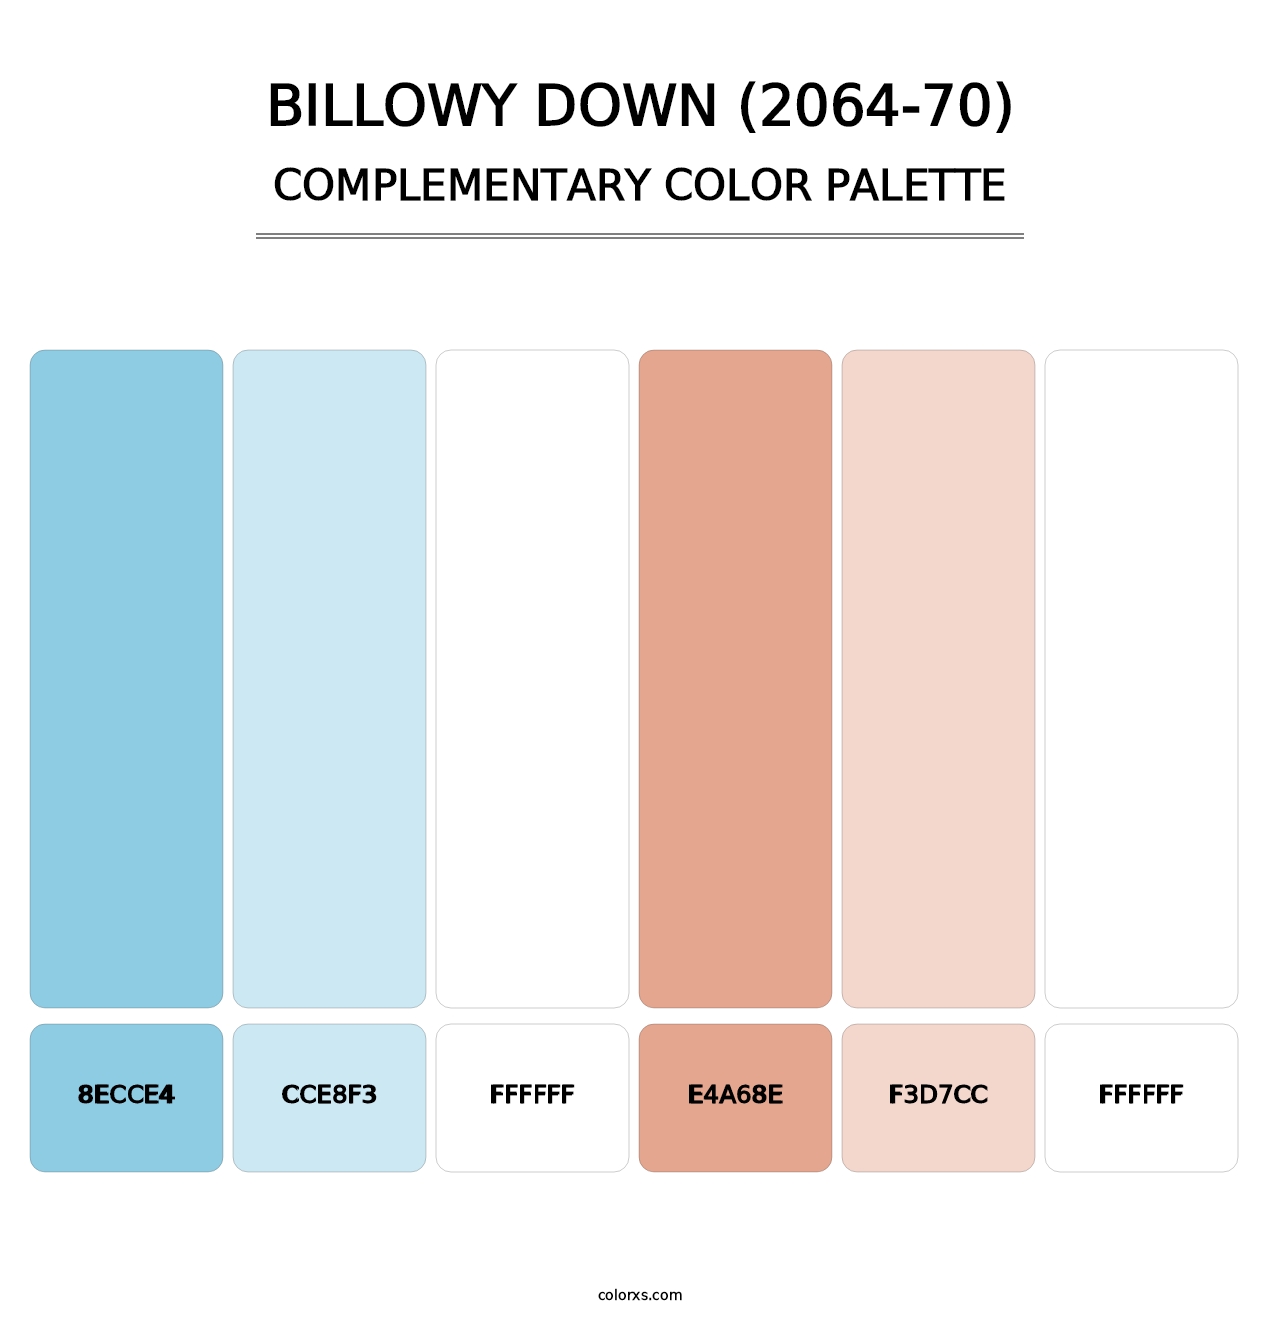 Billowy Down (2064-70) - Complementary Color Palette